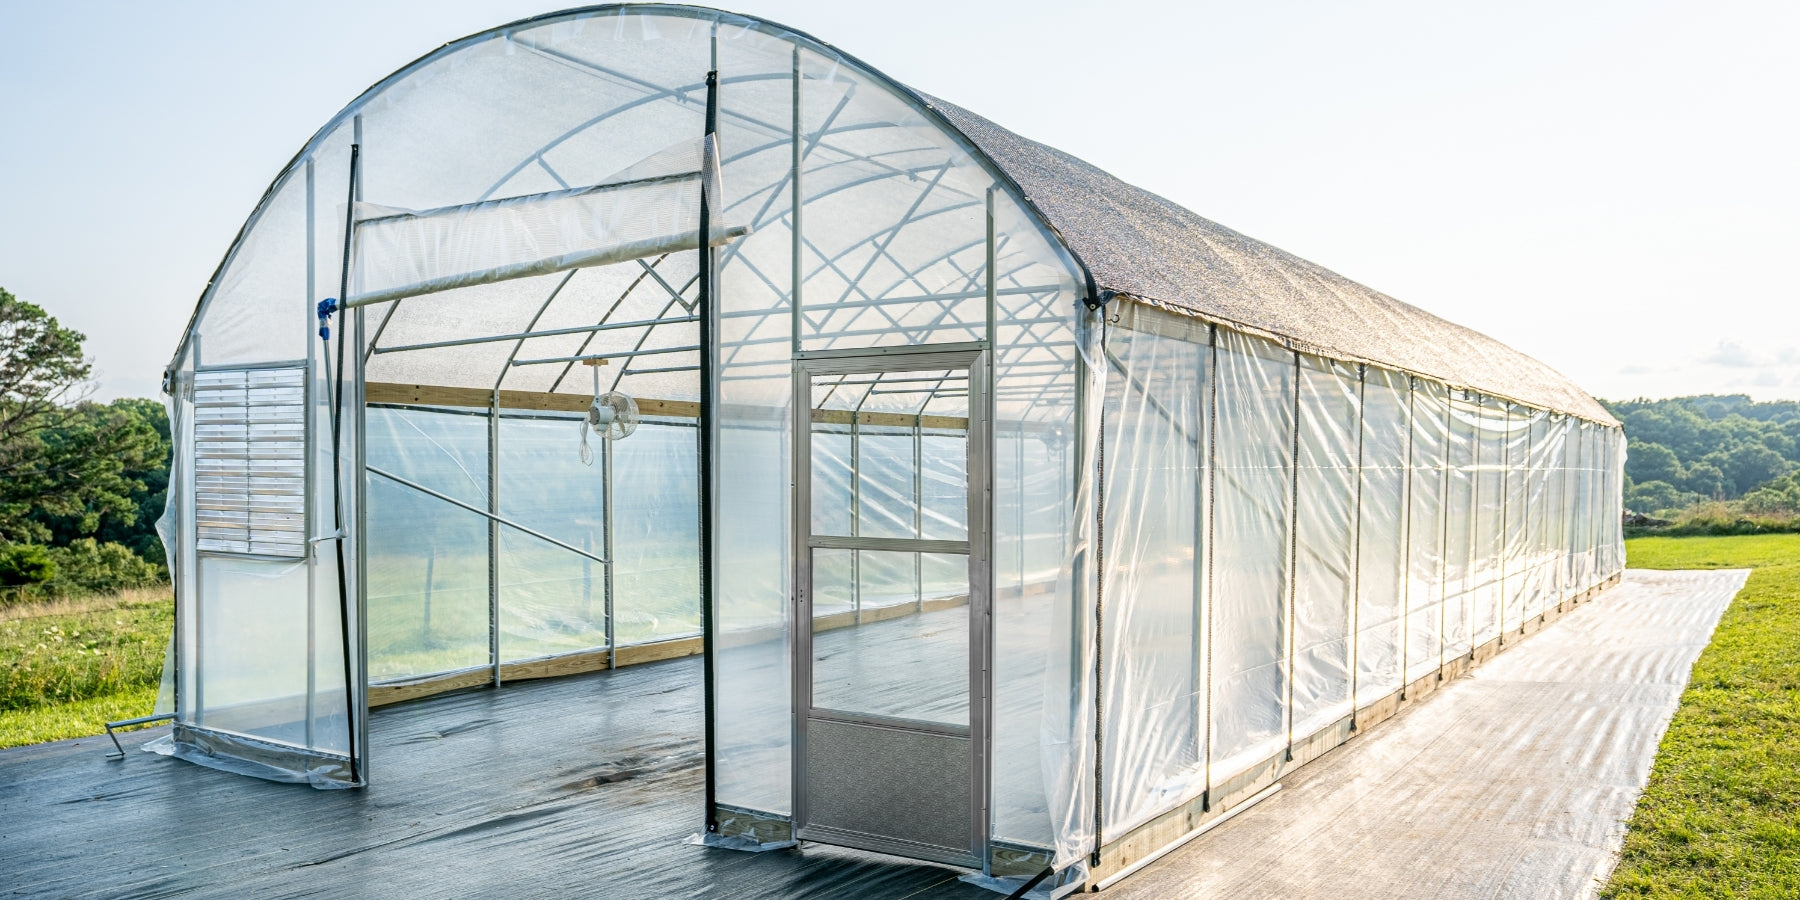 Grower's Solution - Greenhouse Kits, Nursery & Gardening Supplies, Irrigation Equipment, Shade Cloth, Ventilation, High Tunnels, NRCS Certified Houses, Jiffy Peat Pots, & More